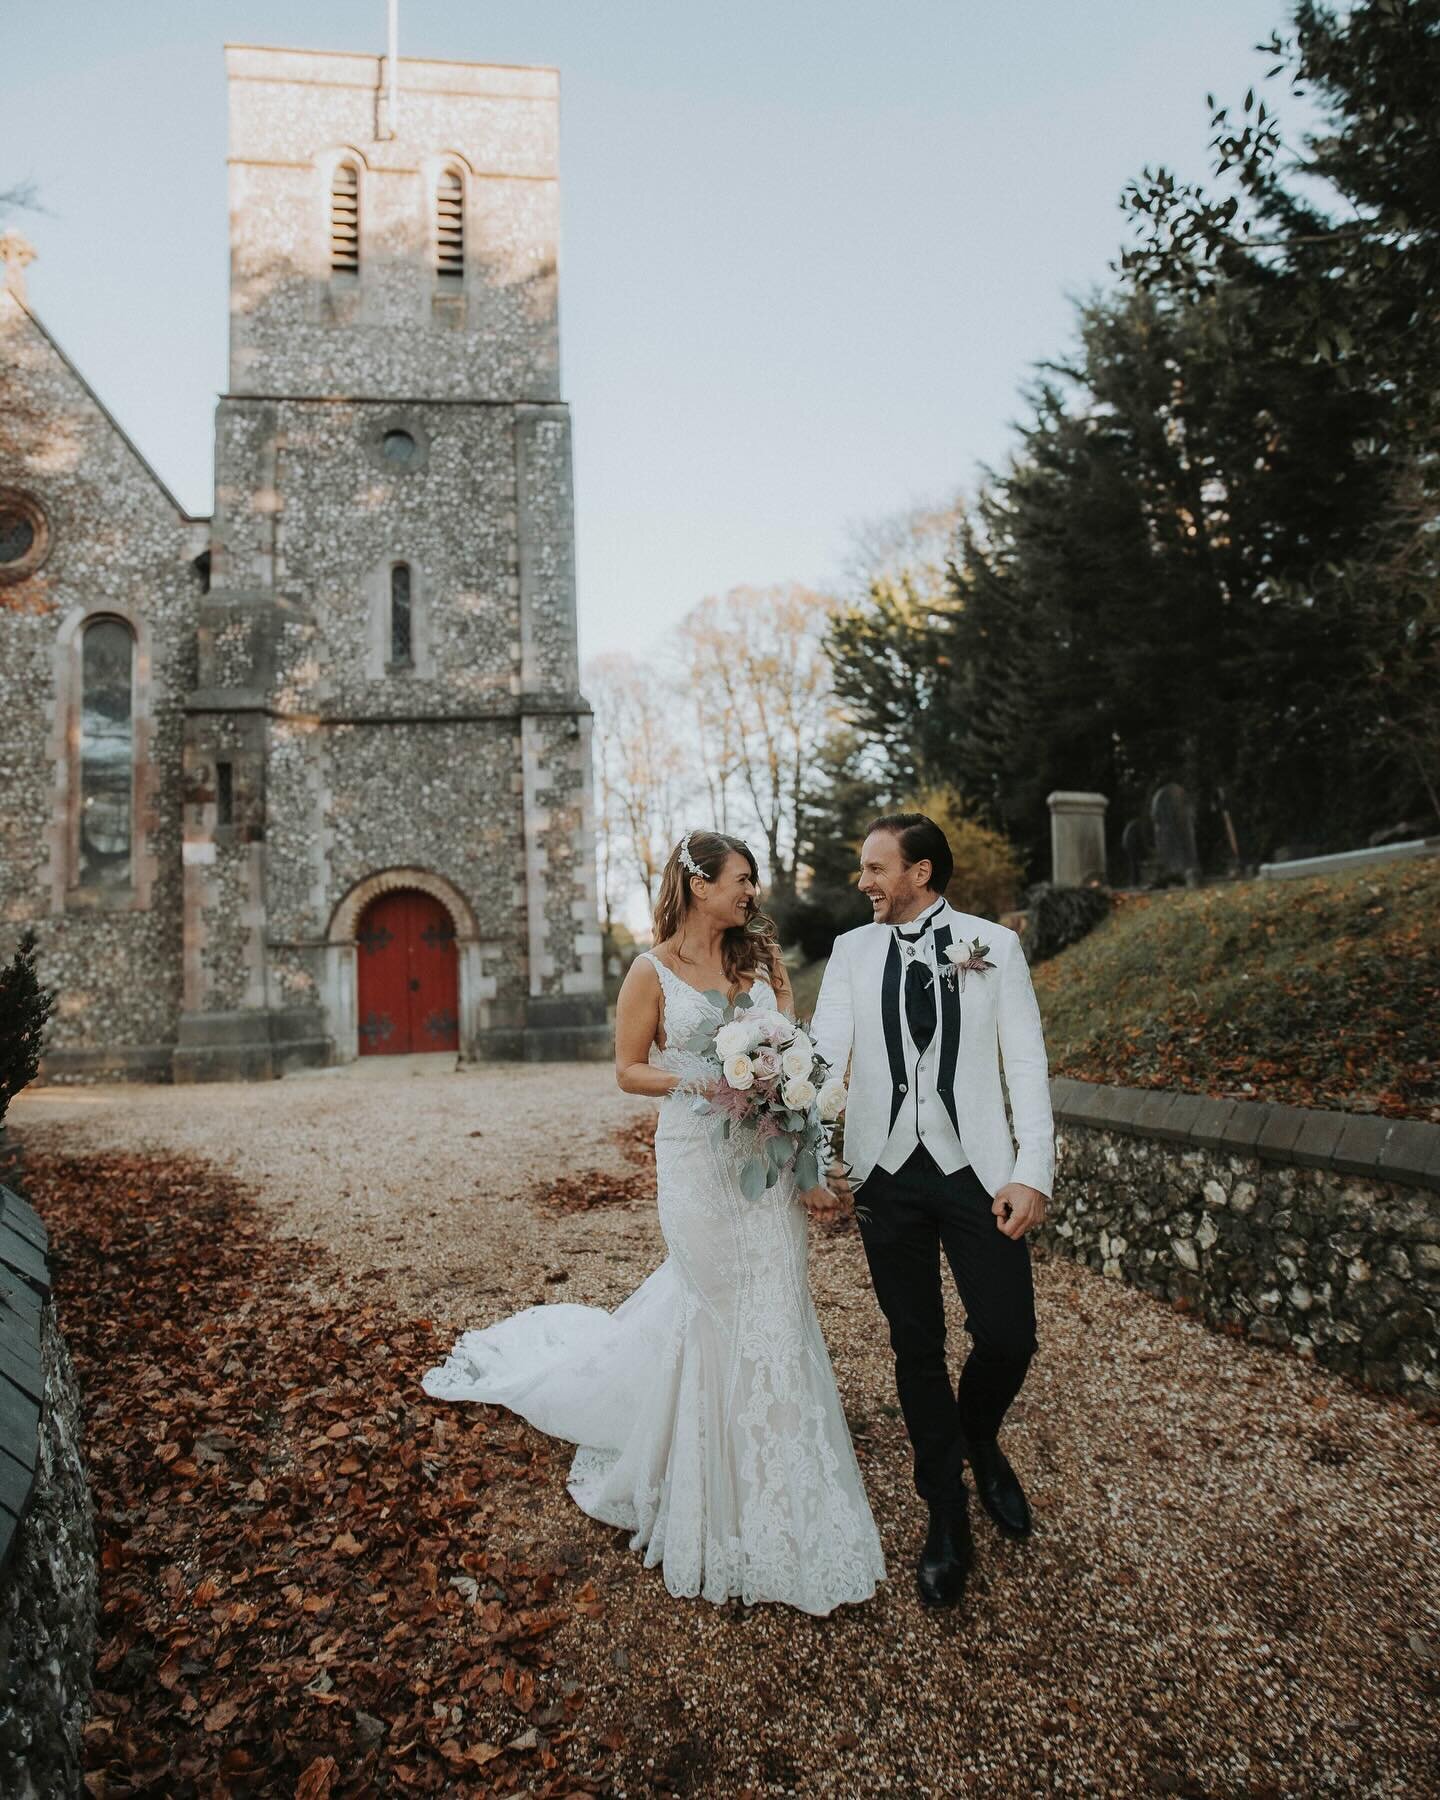 Crisp November days 😍❄️🍁

Had the pleasure of photographing Sean &amp; Lyuda wedding last month and what an absolute banger it was. 

A lovely church ceremony followed by a great reception at one of the most insane houses I&rsquo;ve ever seen - Sti